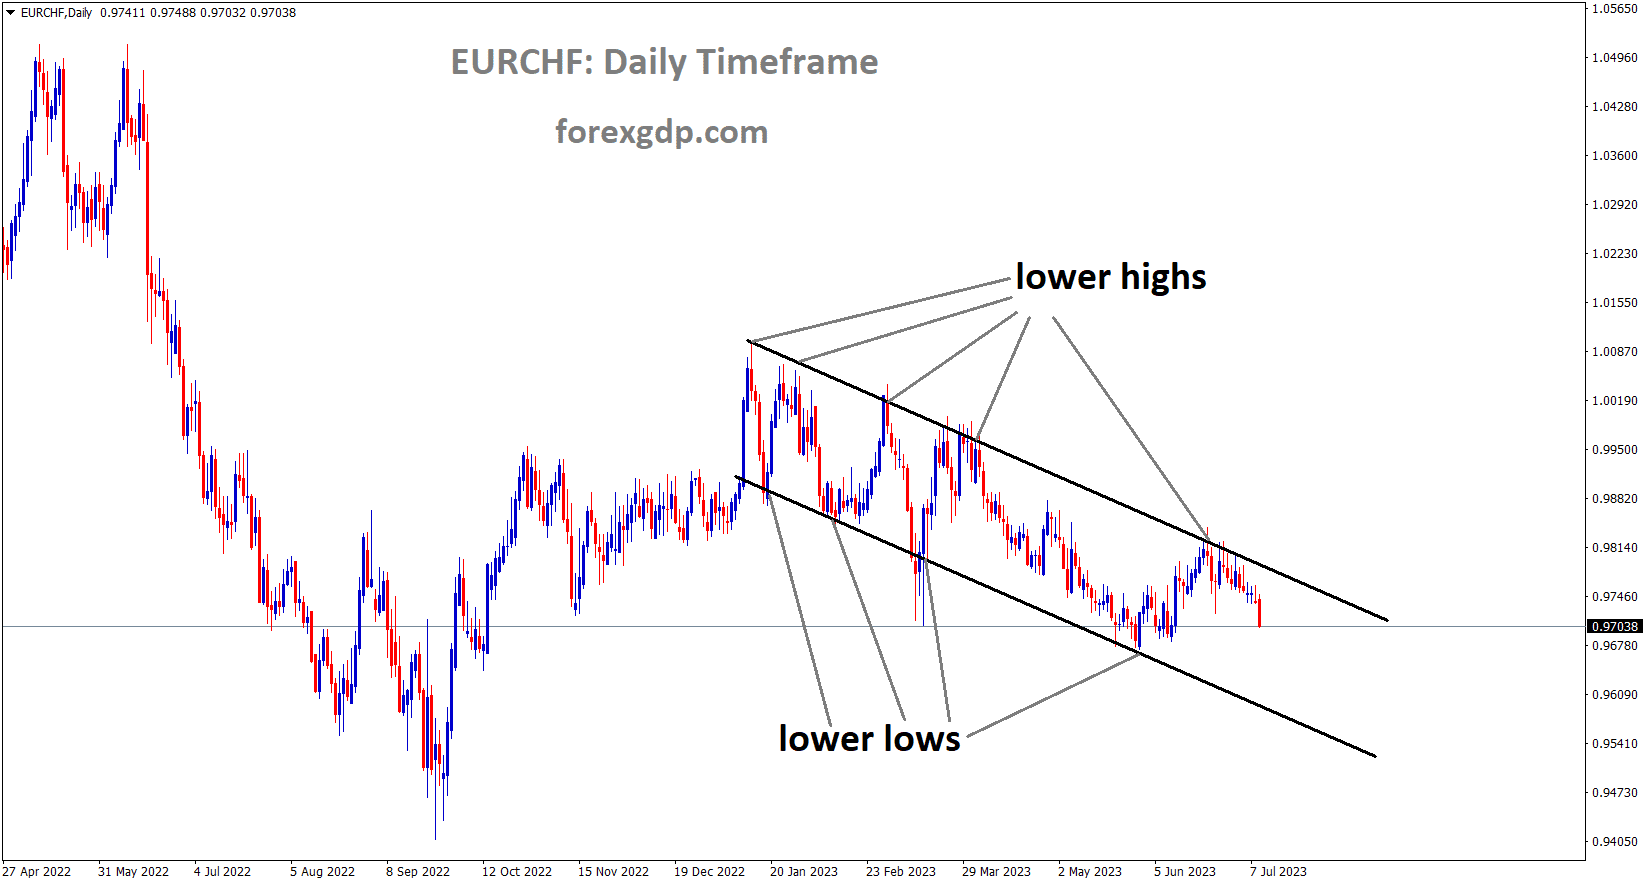 EURCHF is moving in the Descending channel and the market has fallen from the lower high area of the channel